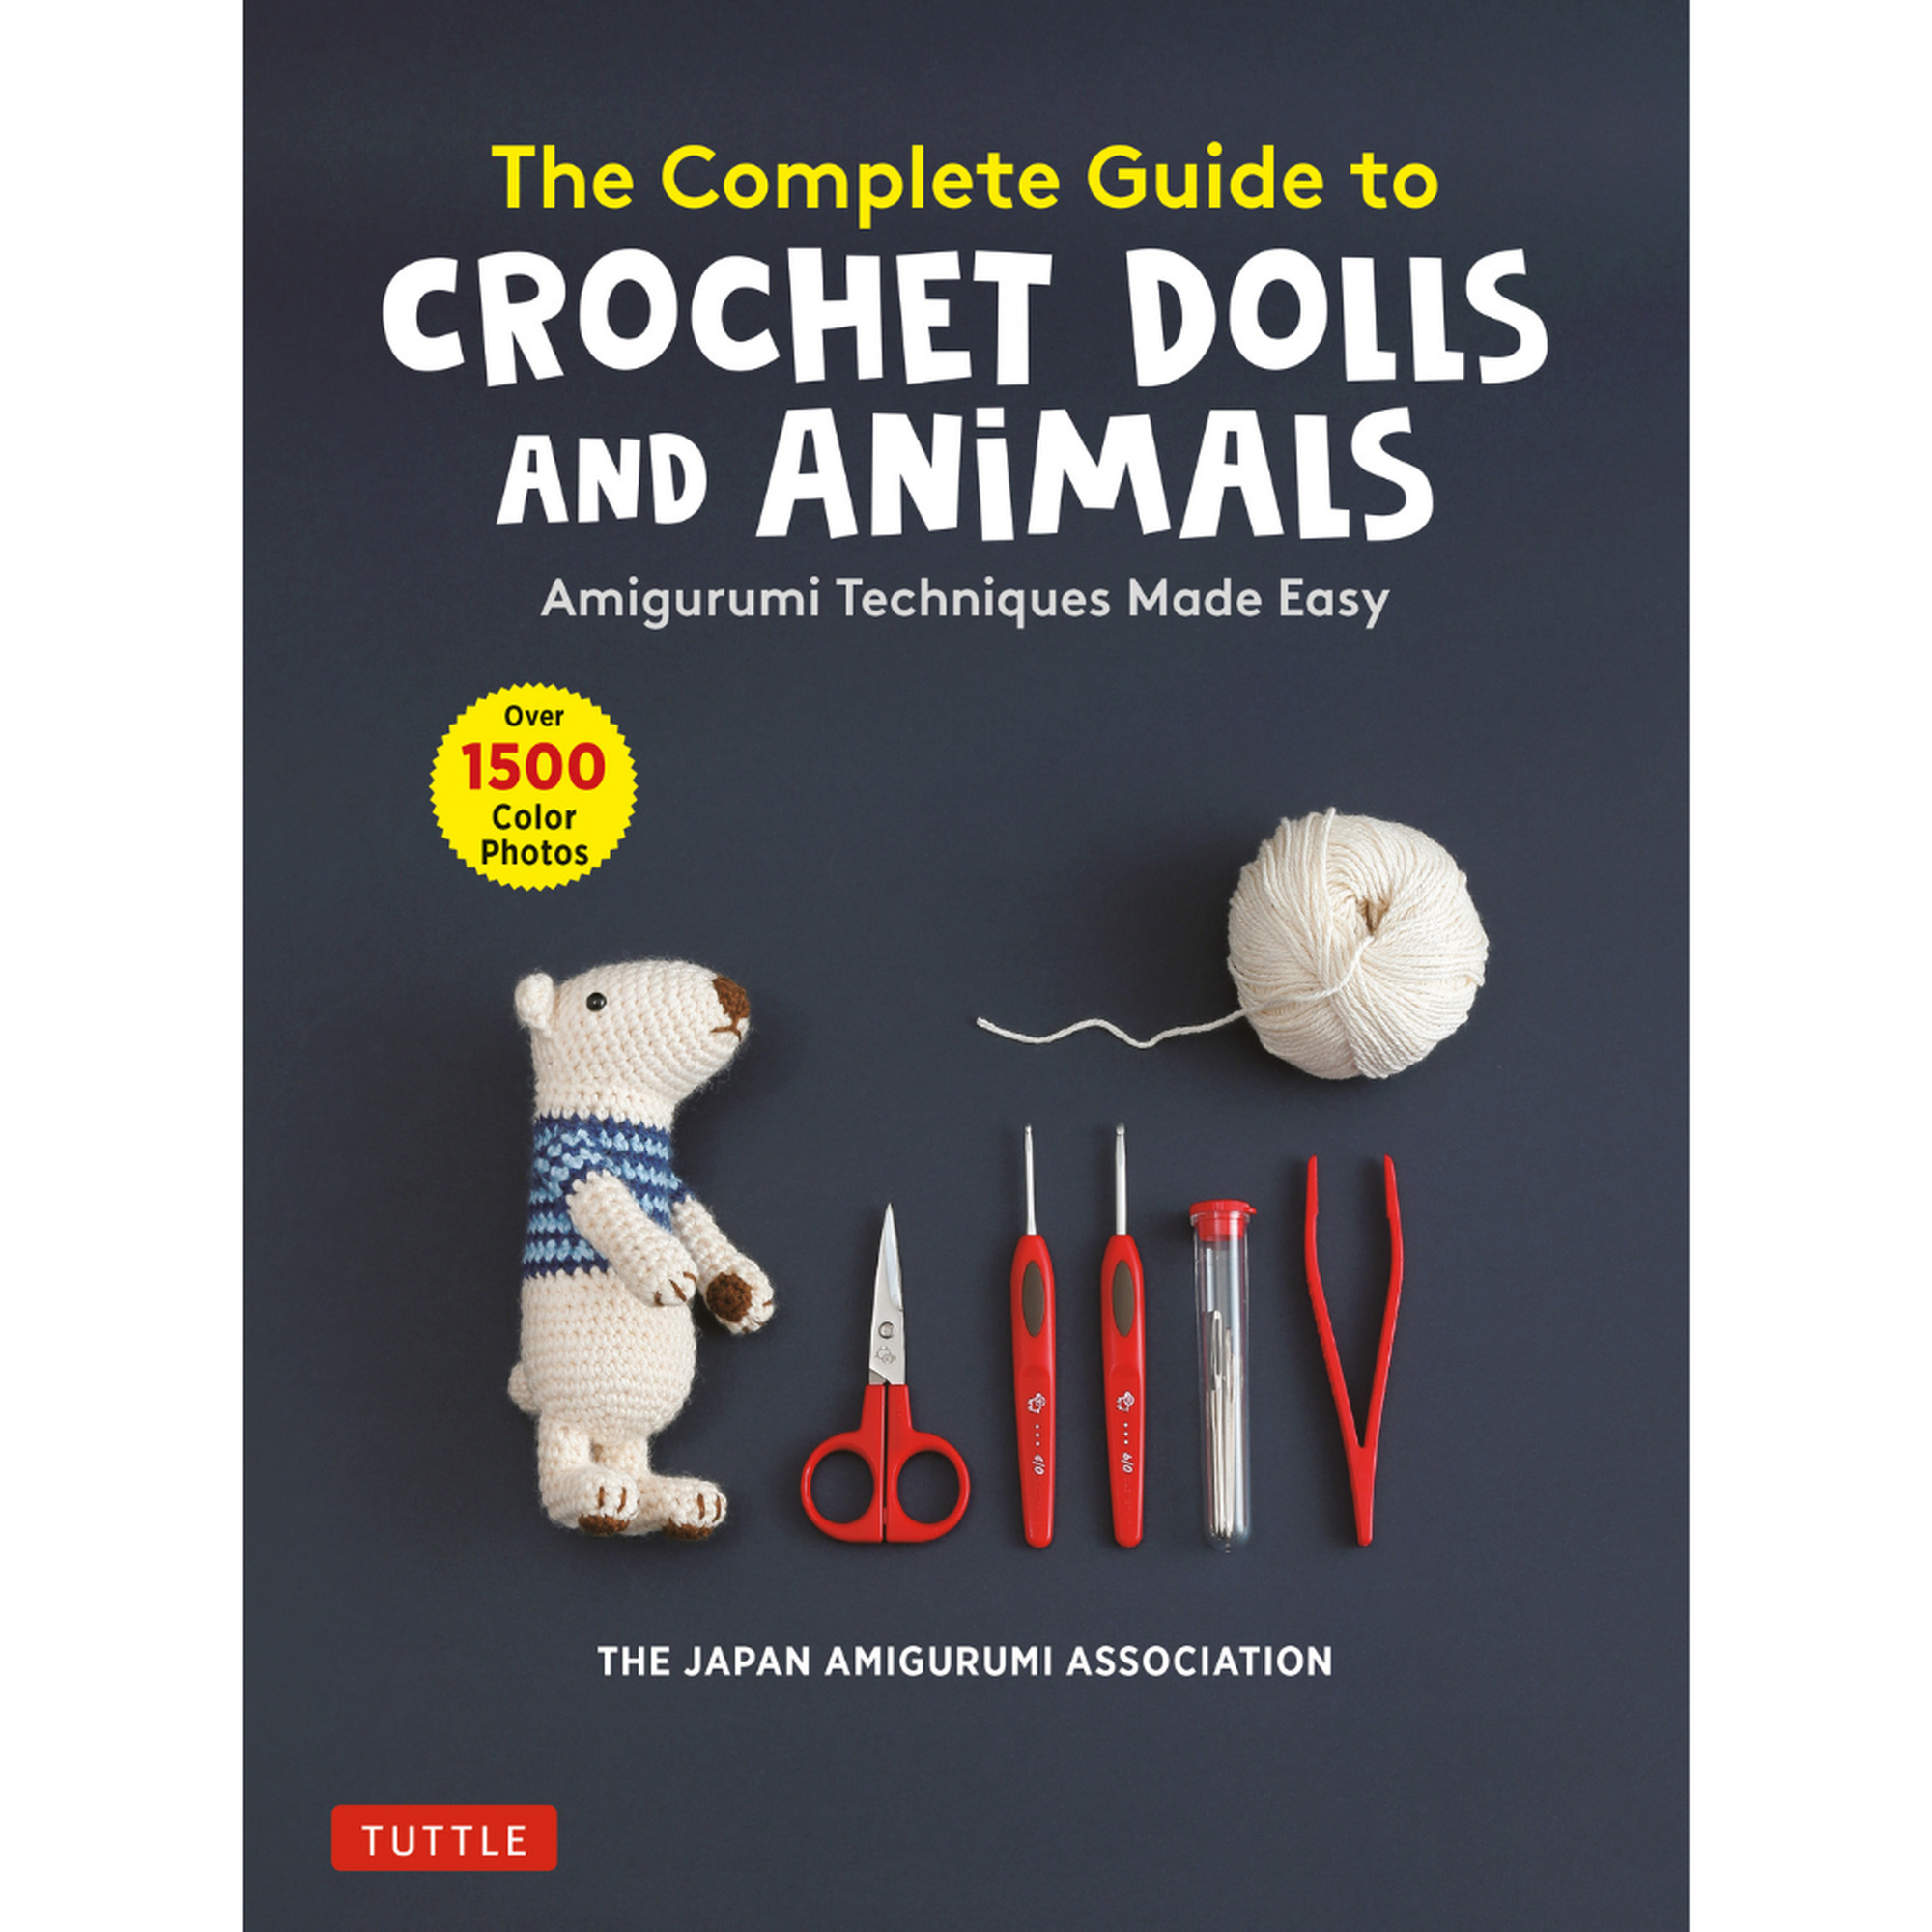 The Complete Guide to Crochet Dolls and Animals Book